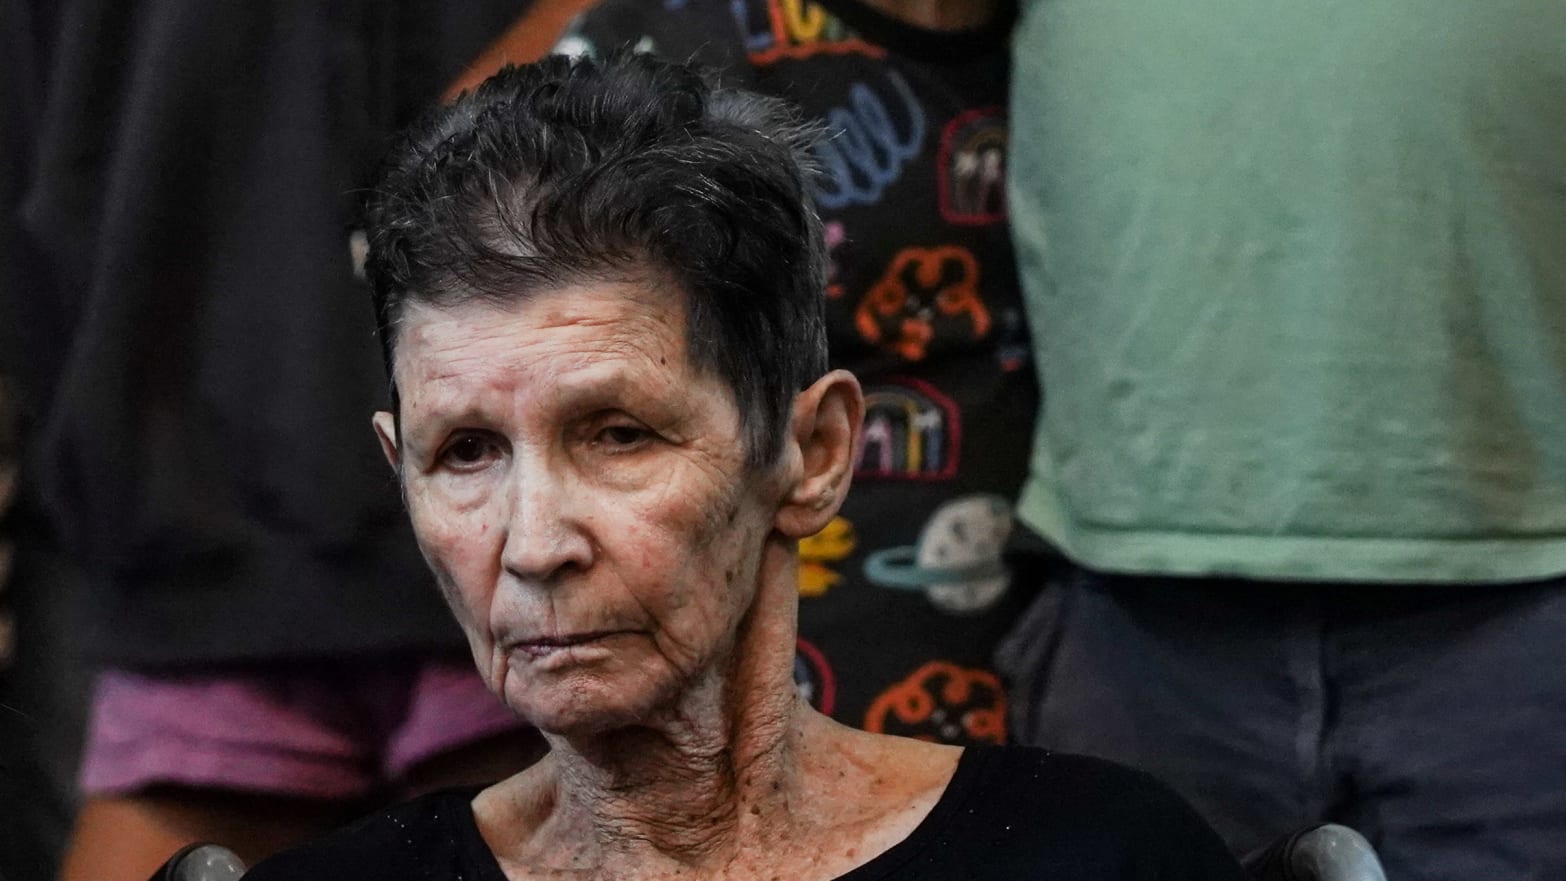 Yocheved Lifshitz, 85, an Israeli grandmother who was held hostage in Gaza looks on after being released by Hamas militants, at Ichilov Hospital in Tel Aviv, Israel, Oct. 24, 2023.